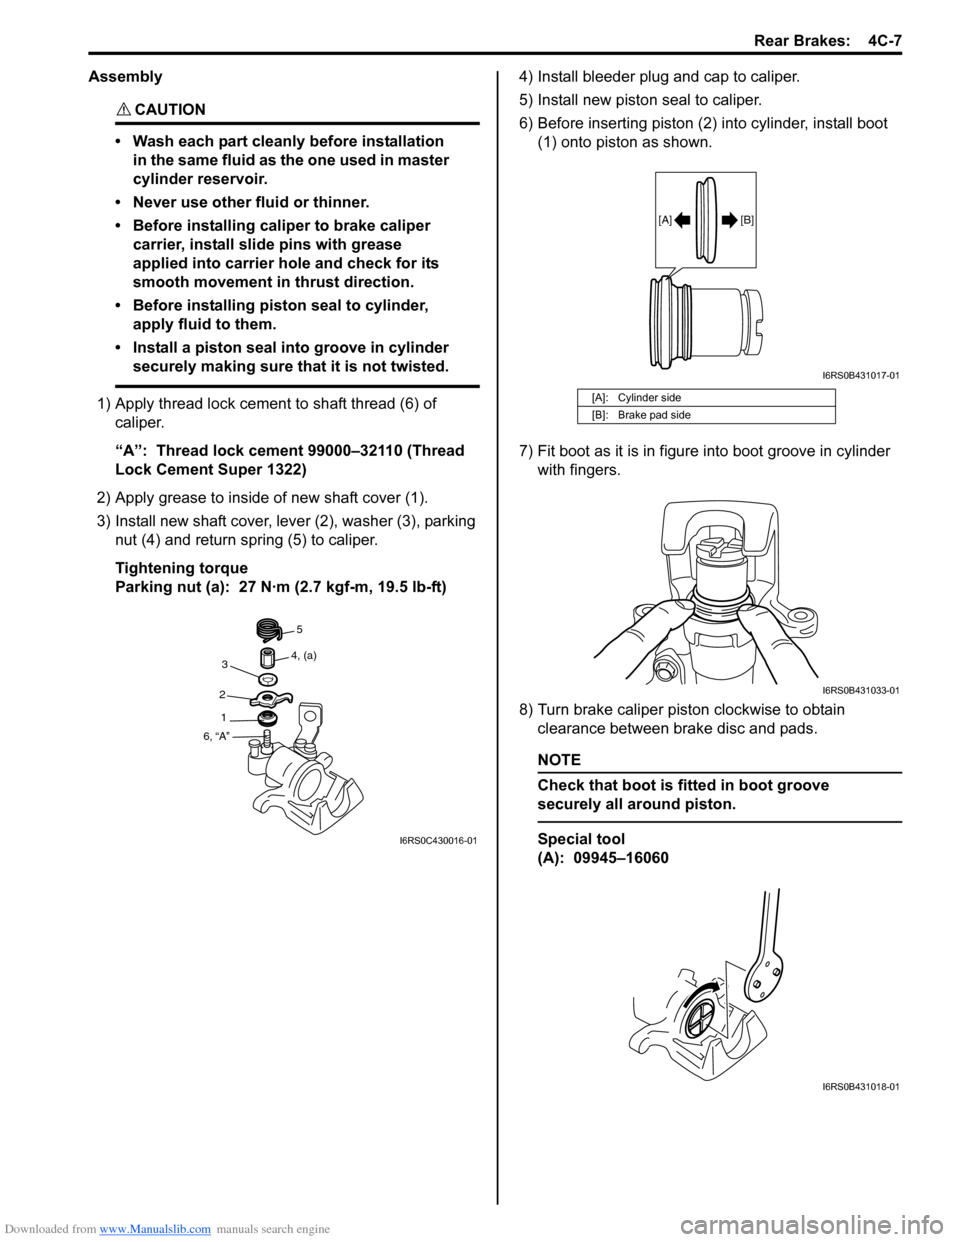 SUZUKI SWIFT 2007 2.G Service Service Manual Downloaded from www.Manualslib.com manuals search engine Rear Brakes:  4C-7
Assembly
CAUTION! 
• Wash each part cleanly before installation in the same fluid as the one used in master 
cylinder rese